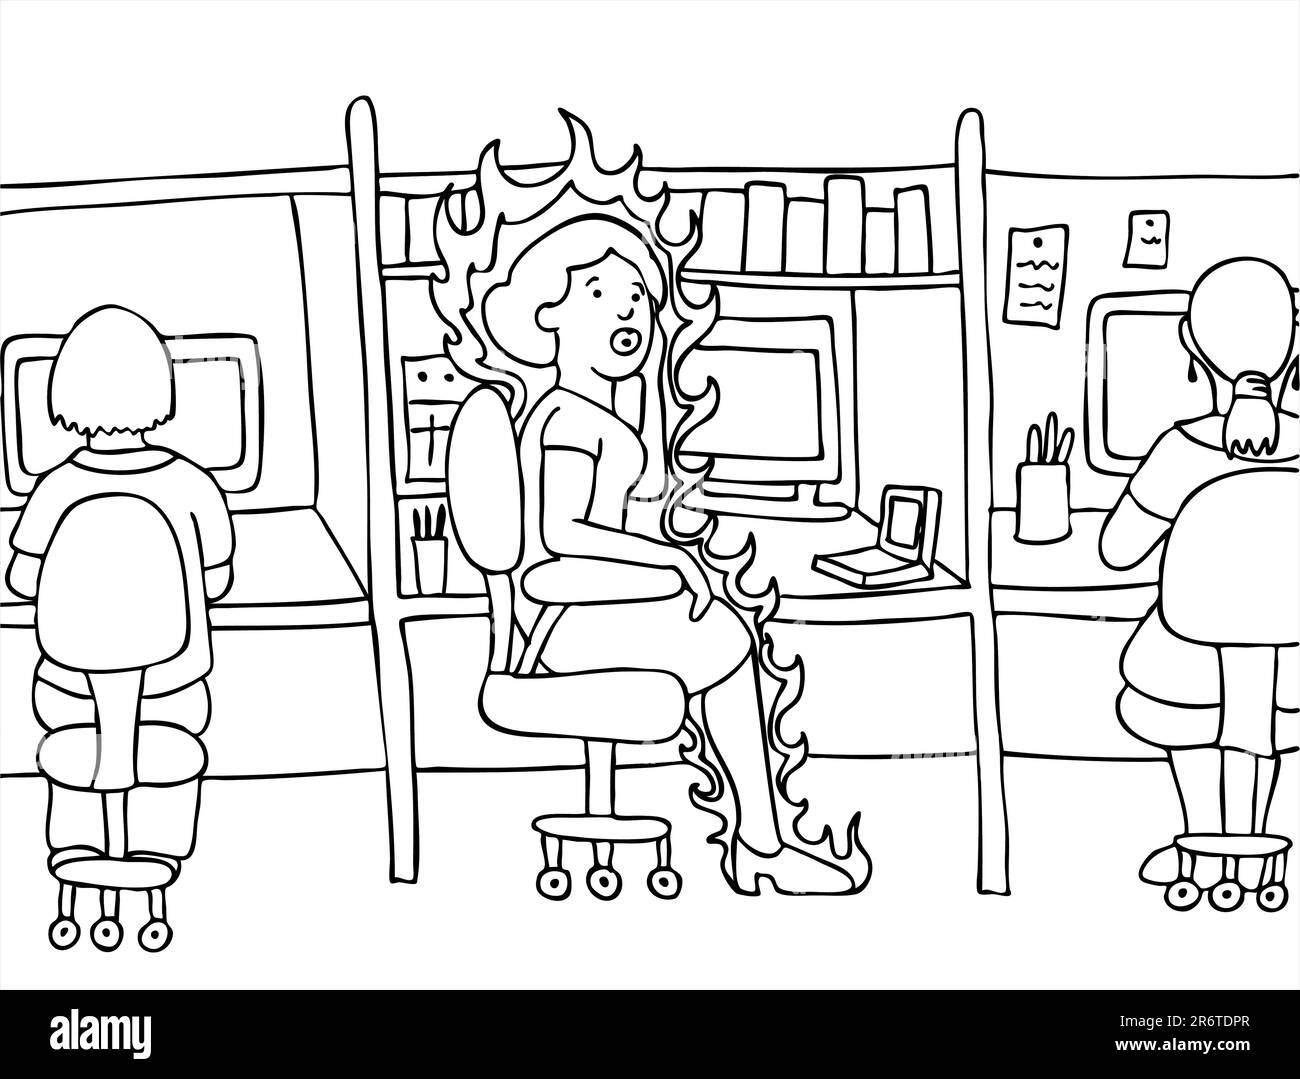 Menopausal woman experiences a hot flash while at work - black and white. Stock Vector